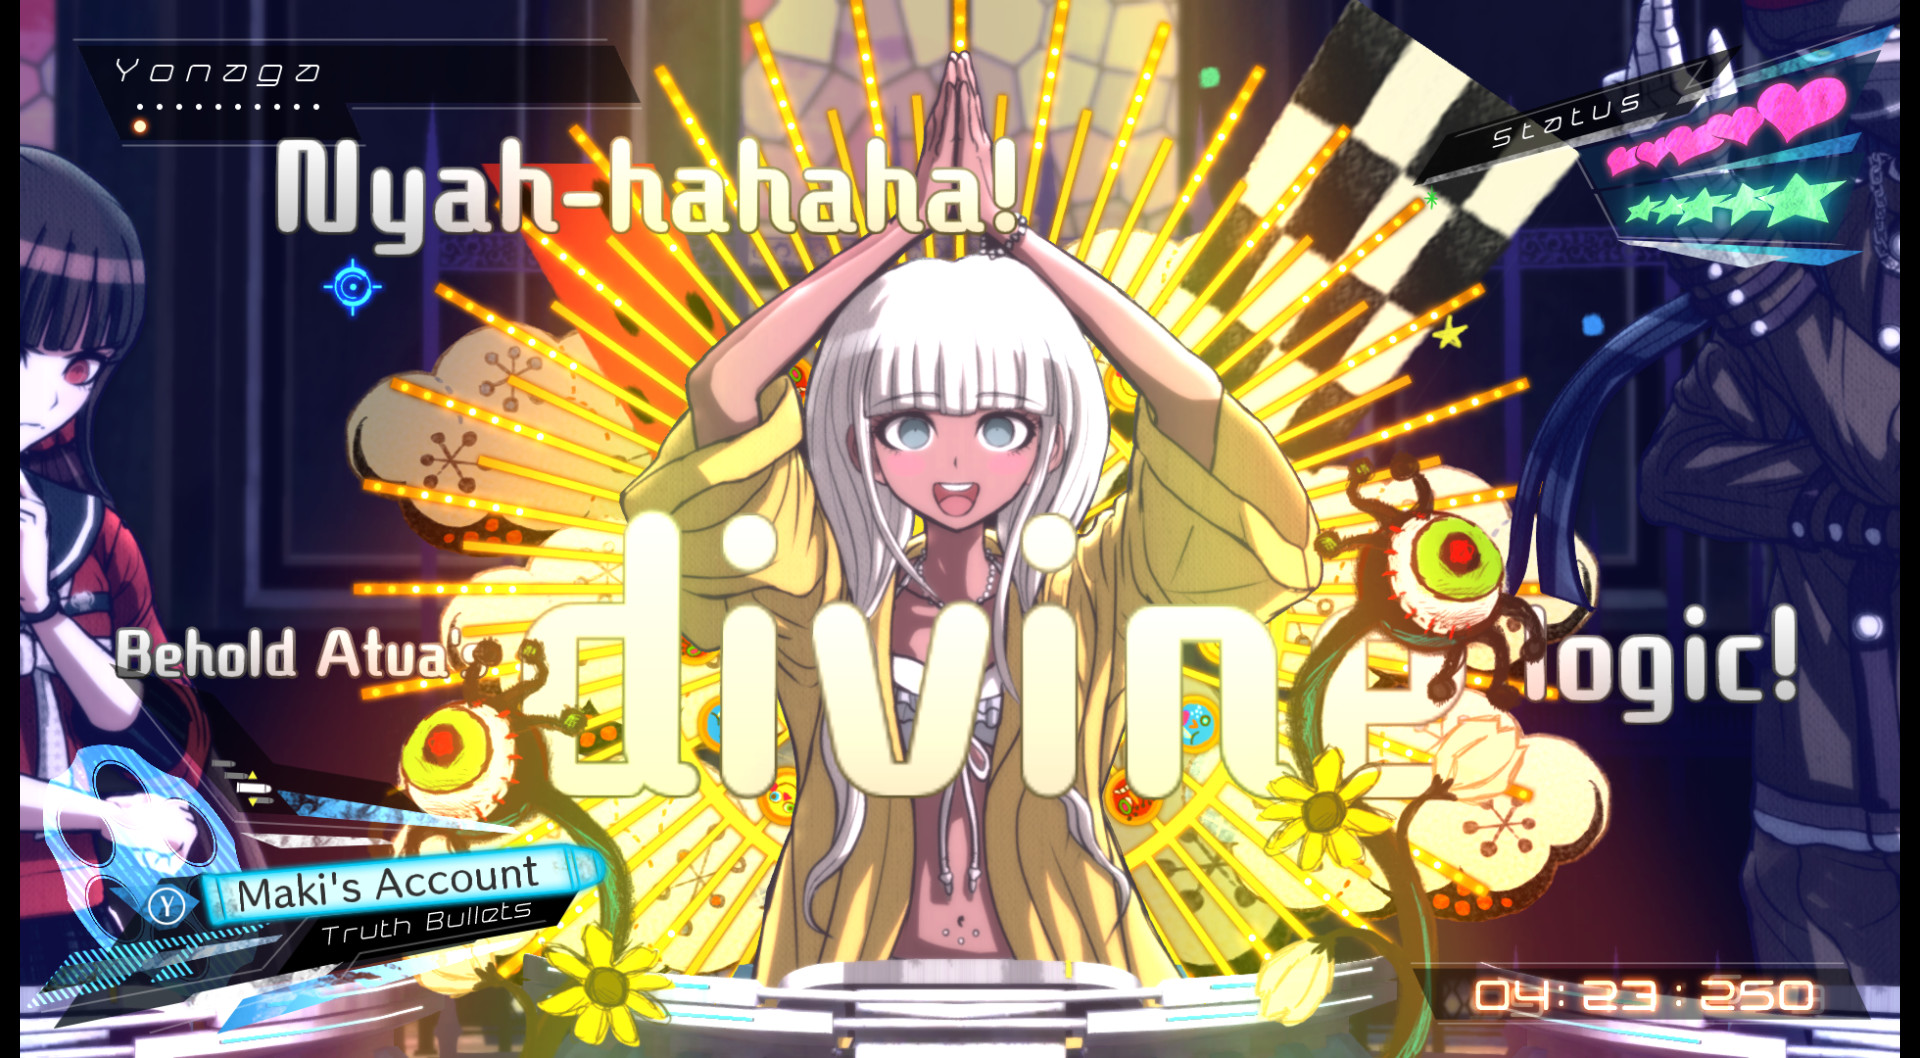 Danganronpa characters in Royale High, AND HOW TO BE THEM